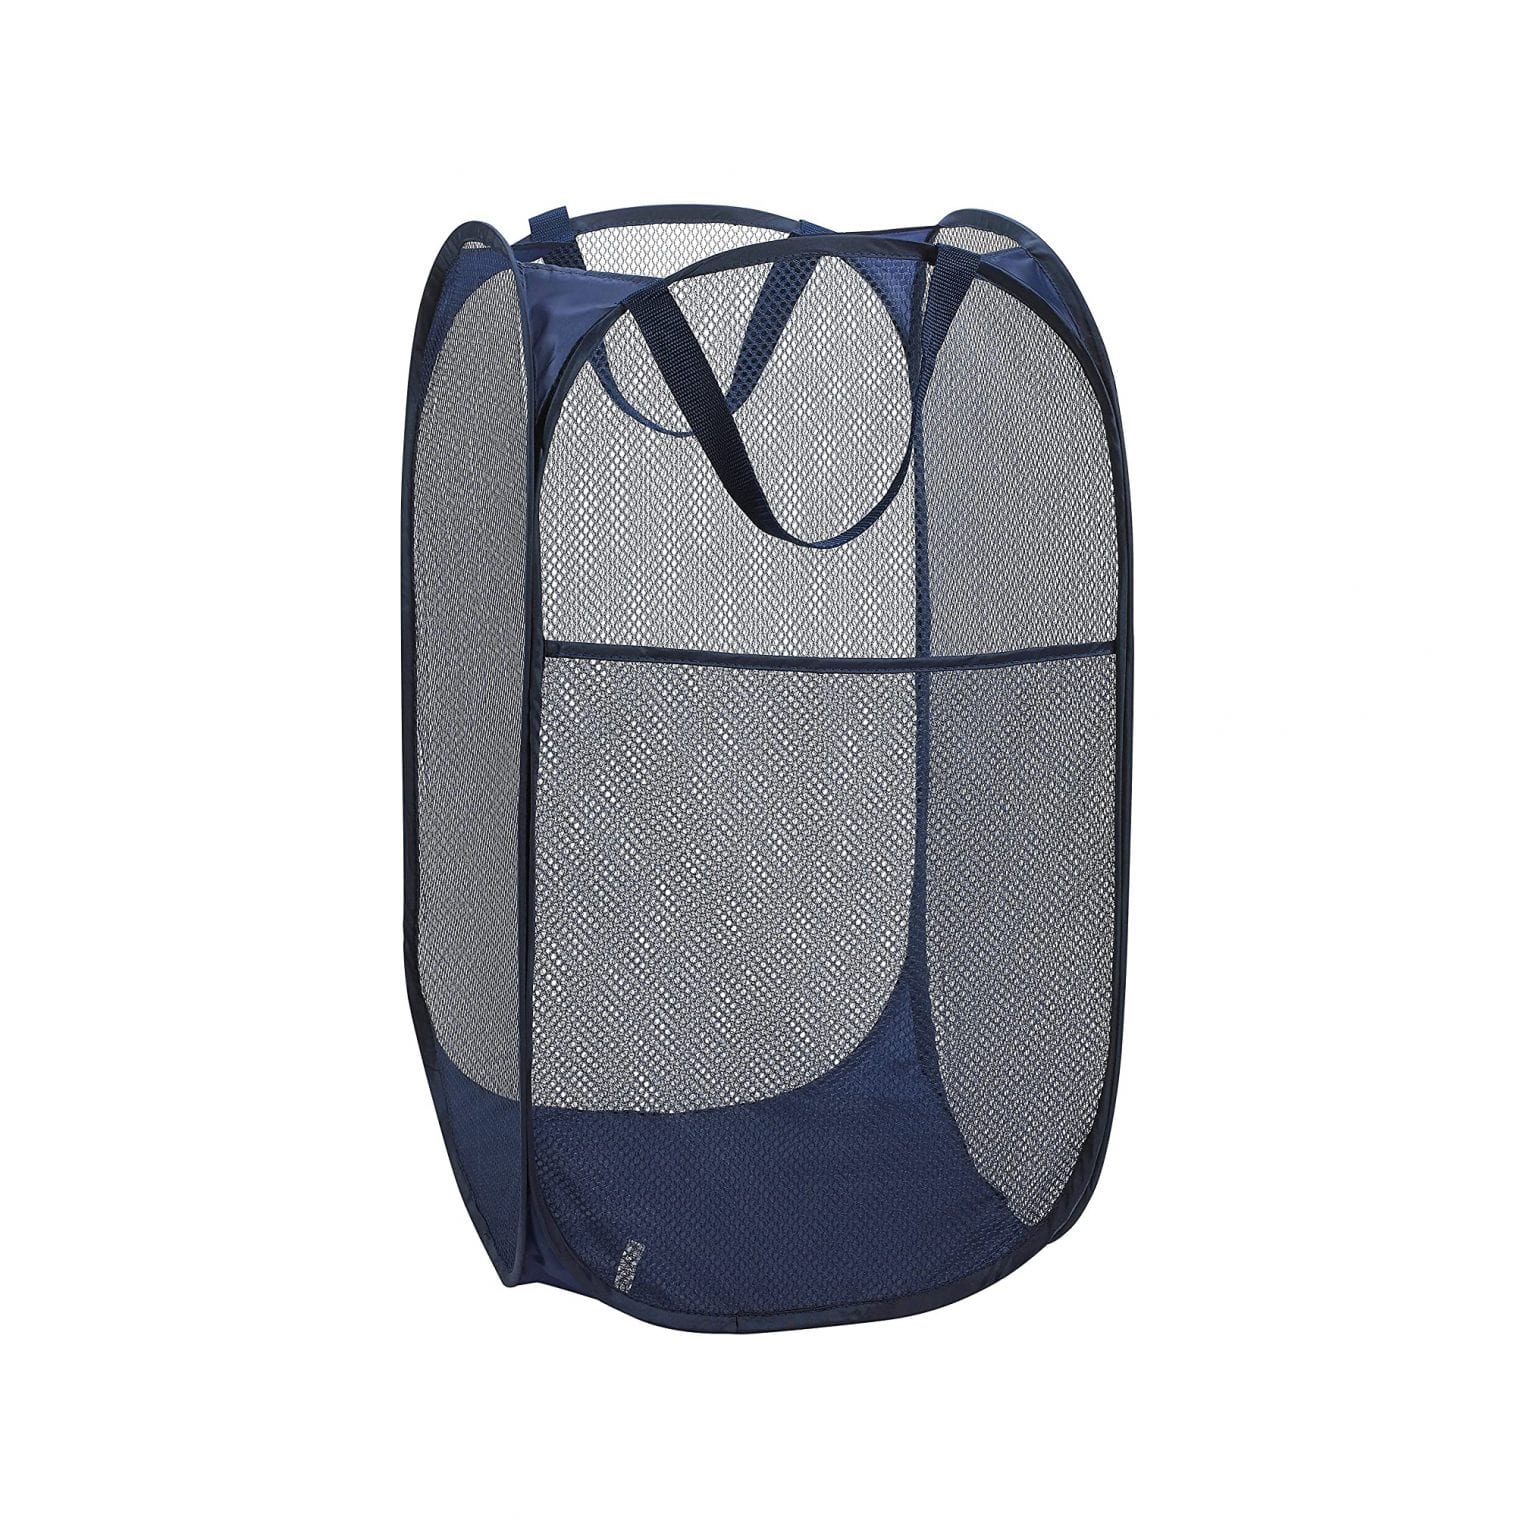 Top 10 Best Laundry Baskets in 2021 Reviews | Buyer’s Guide